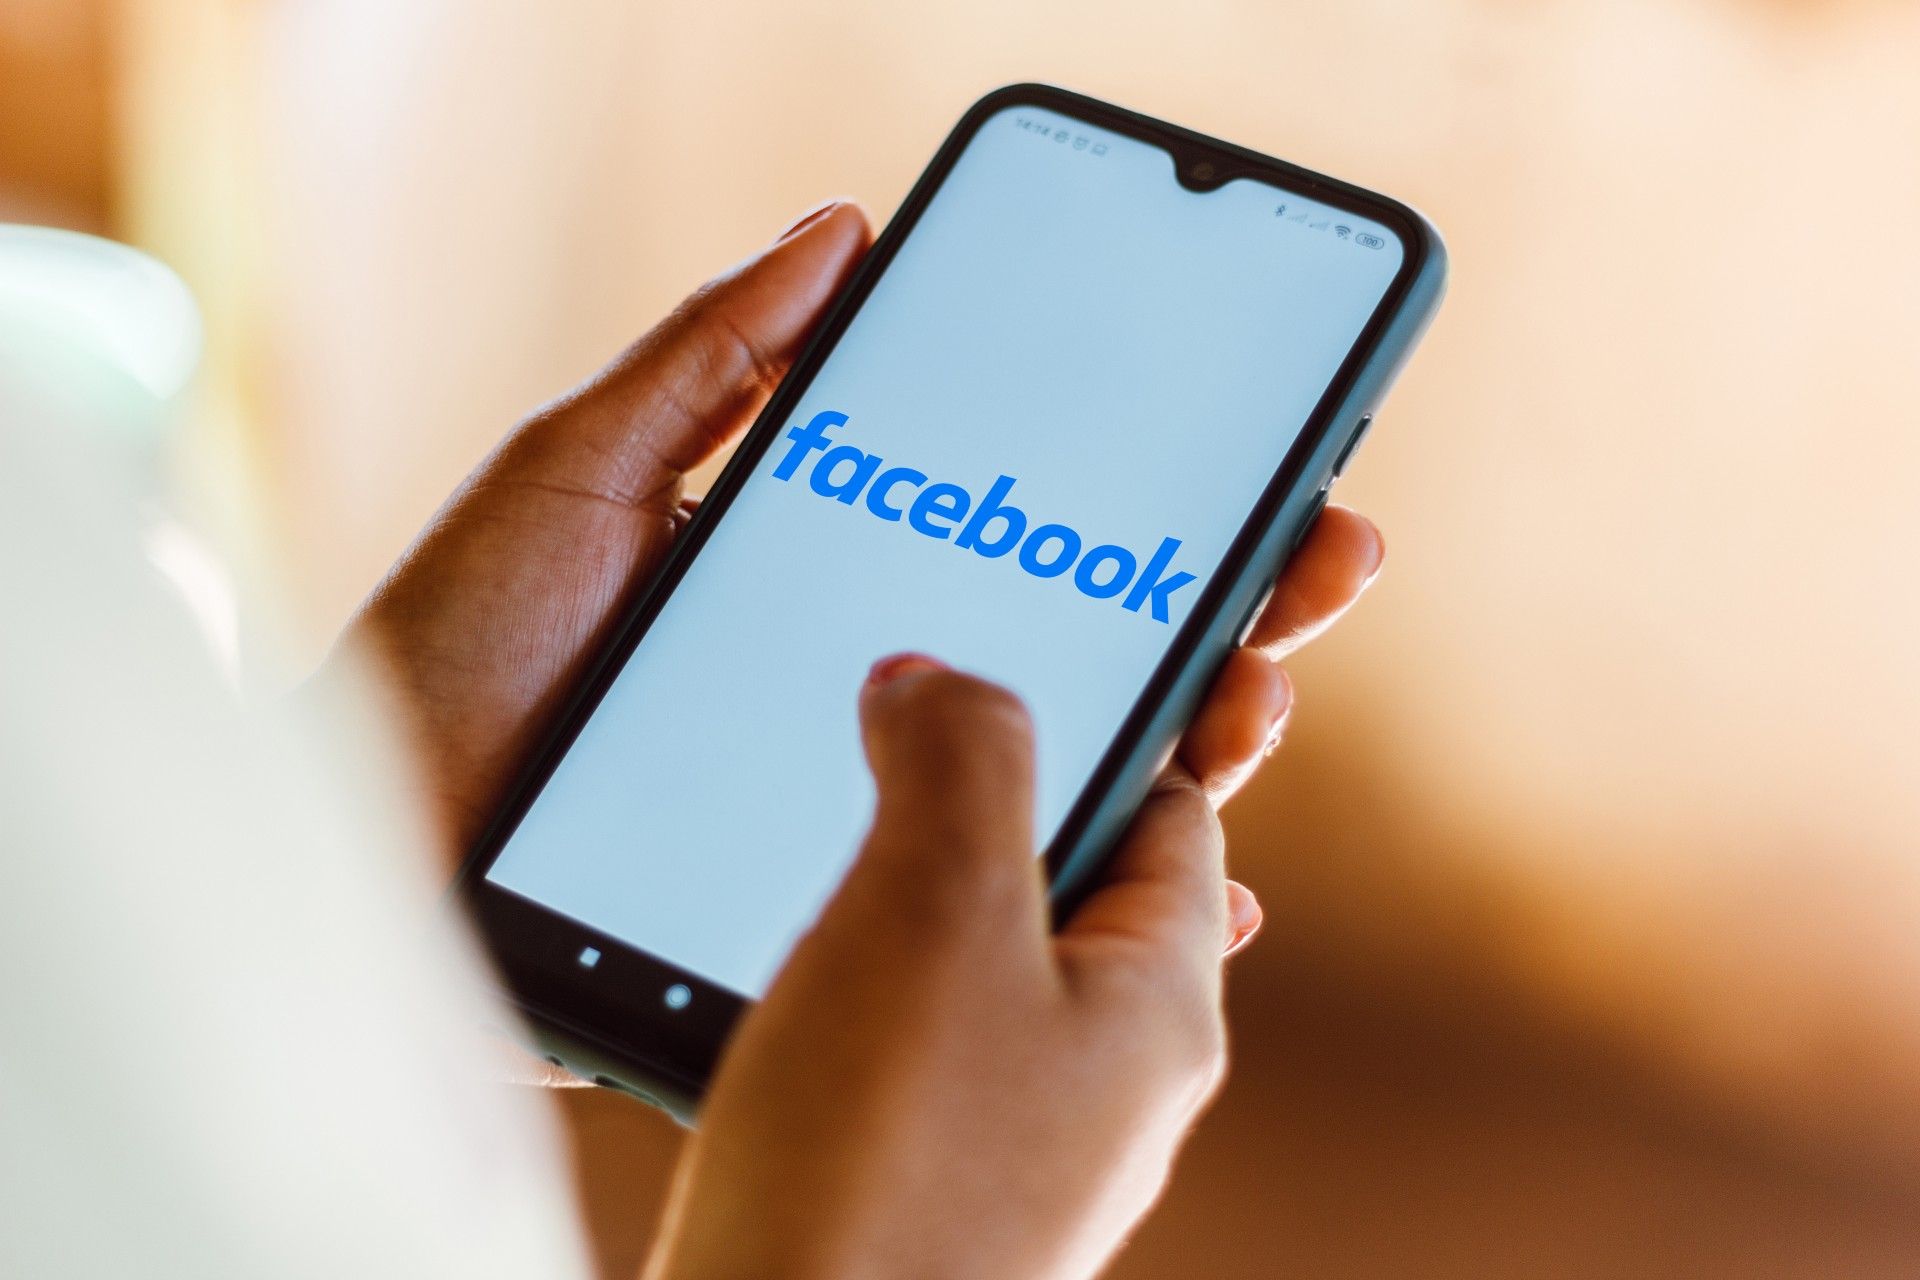 Closeup of the Facebook loading screen on a smartphone in someone's hands - data privacy